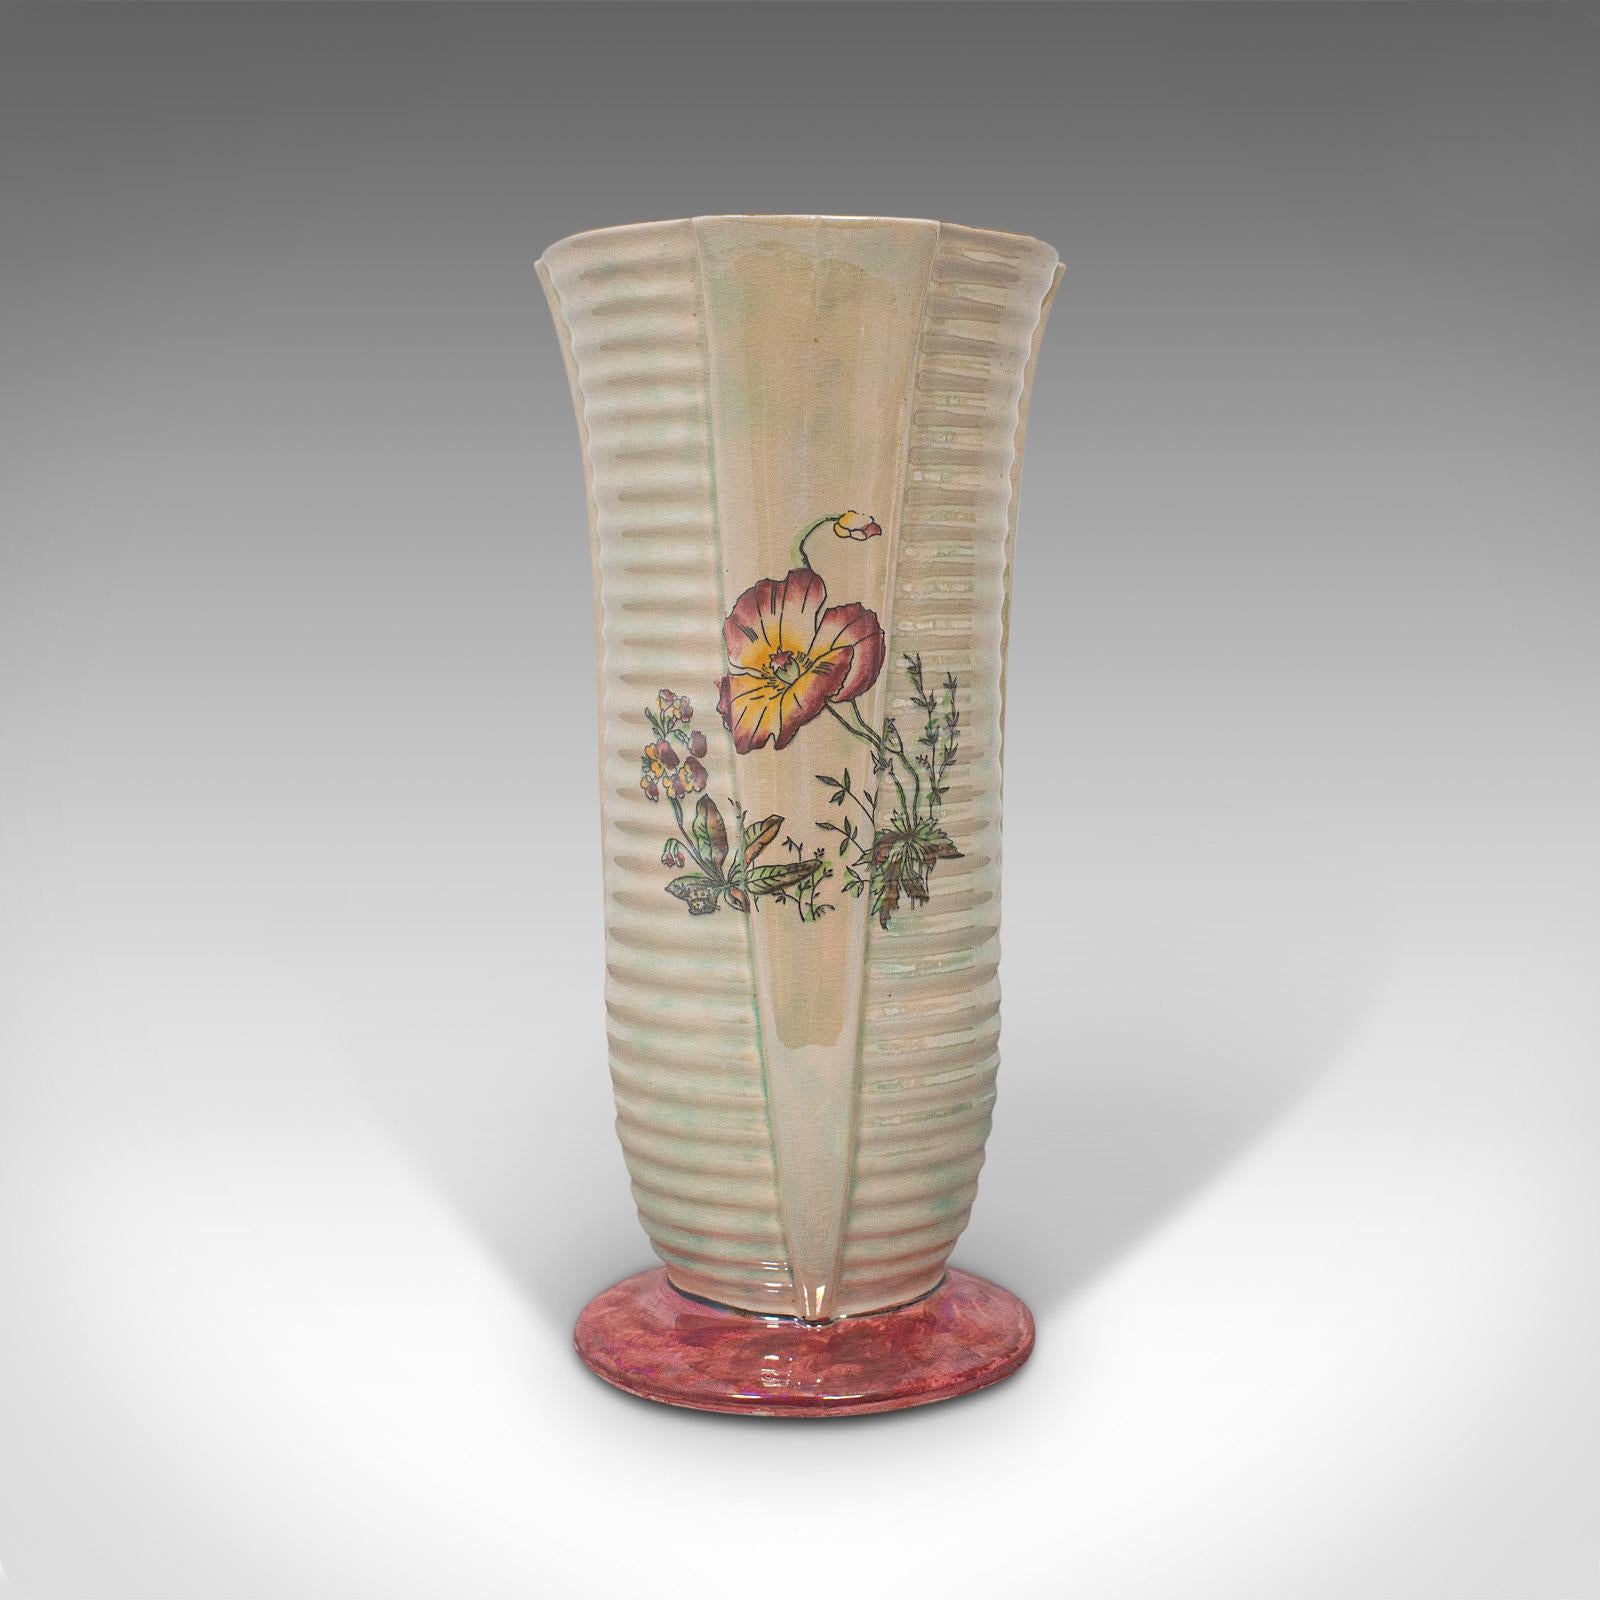 This is a vintage flower vase. An English, ceramic, decorative vase with lustre finish, dating to the mid-20th century, circa 1950.

Fascinating shape with an appealing shimmer
Displaying a desirable aged patina
Ceramic finished in a cream